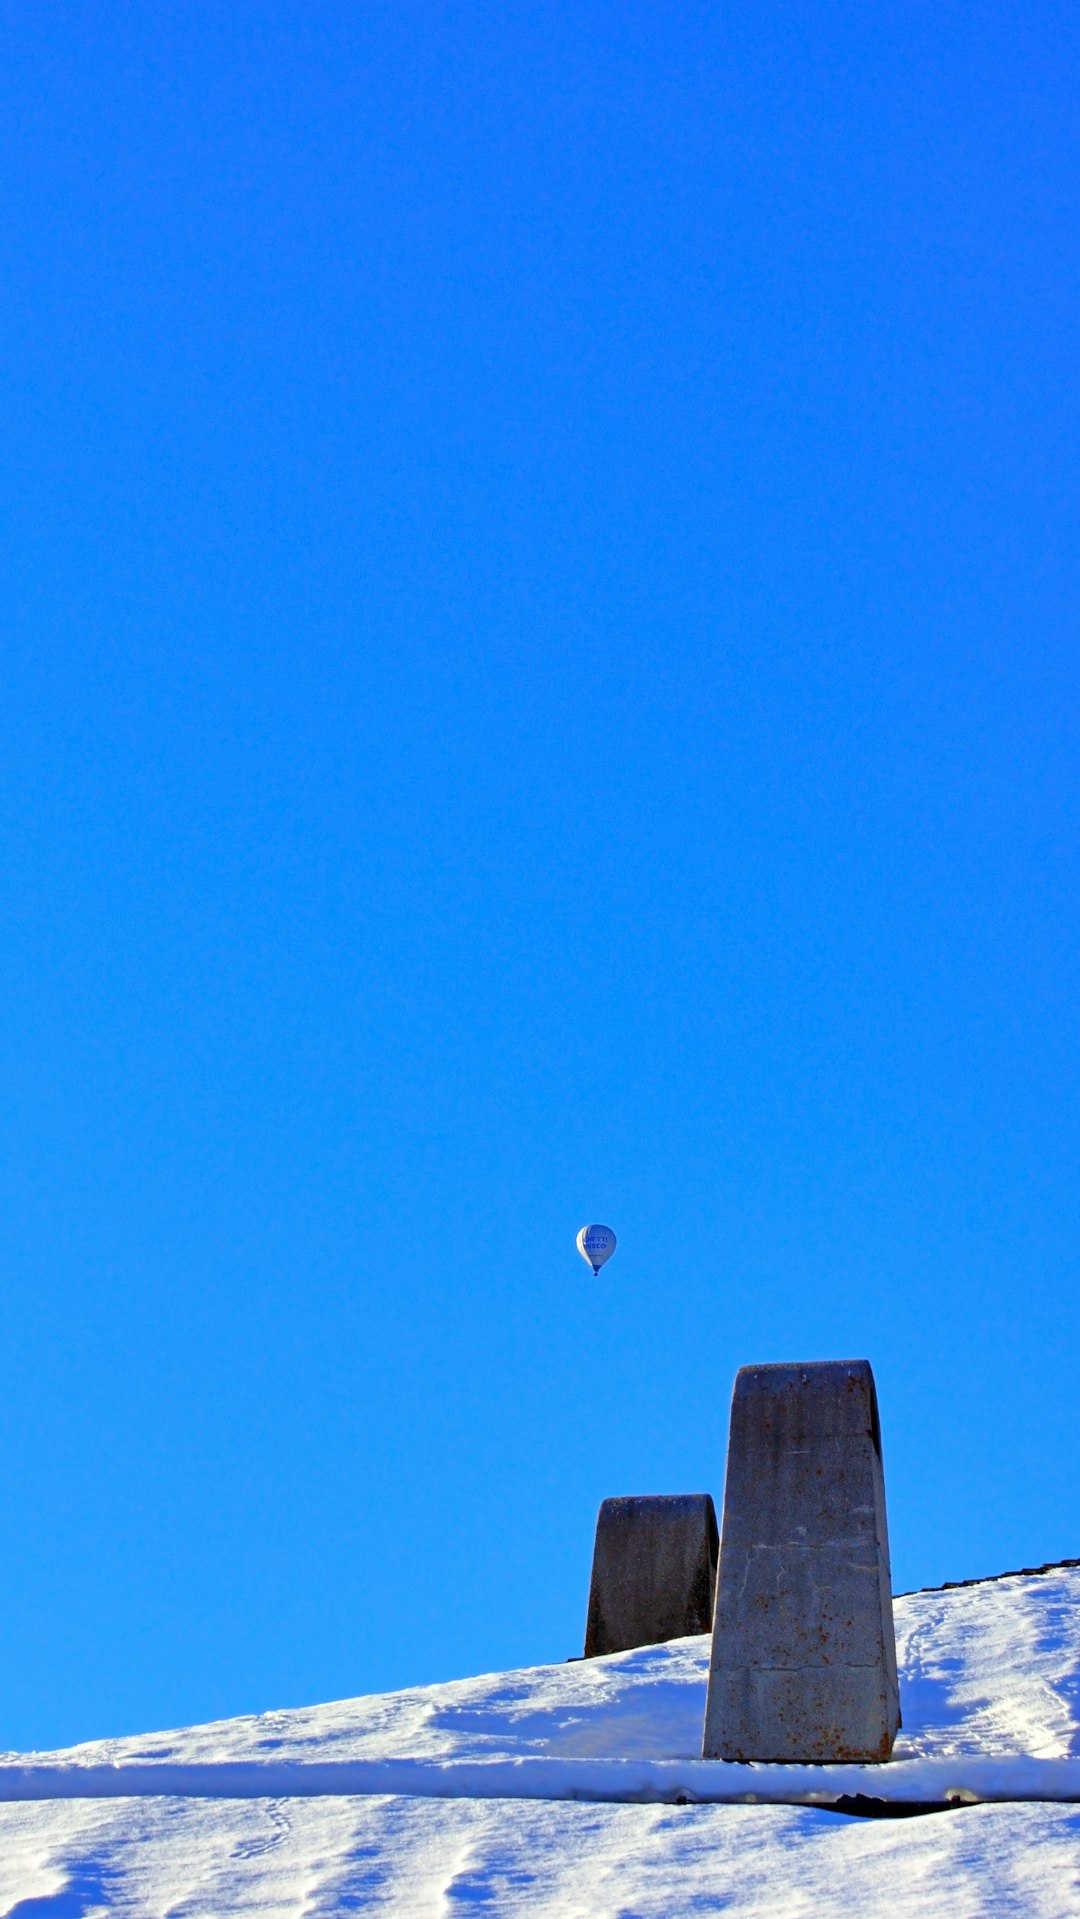 red and white hot air balloon in the sky